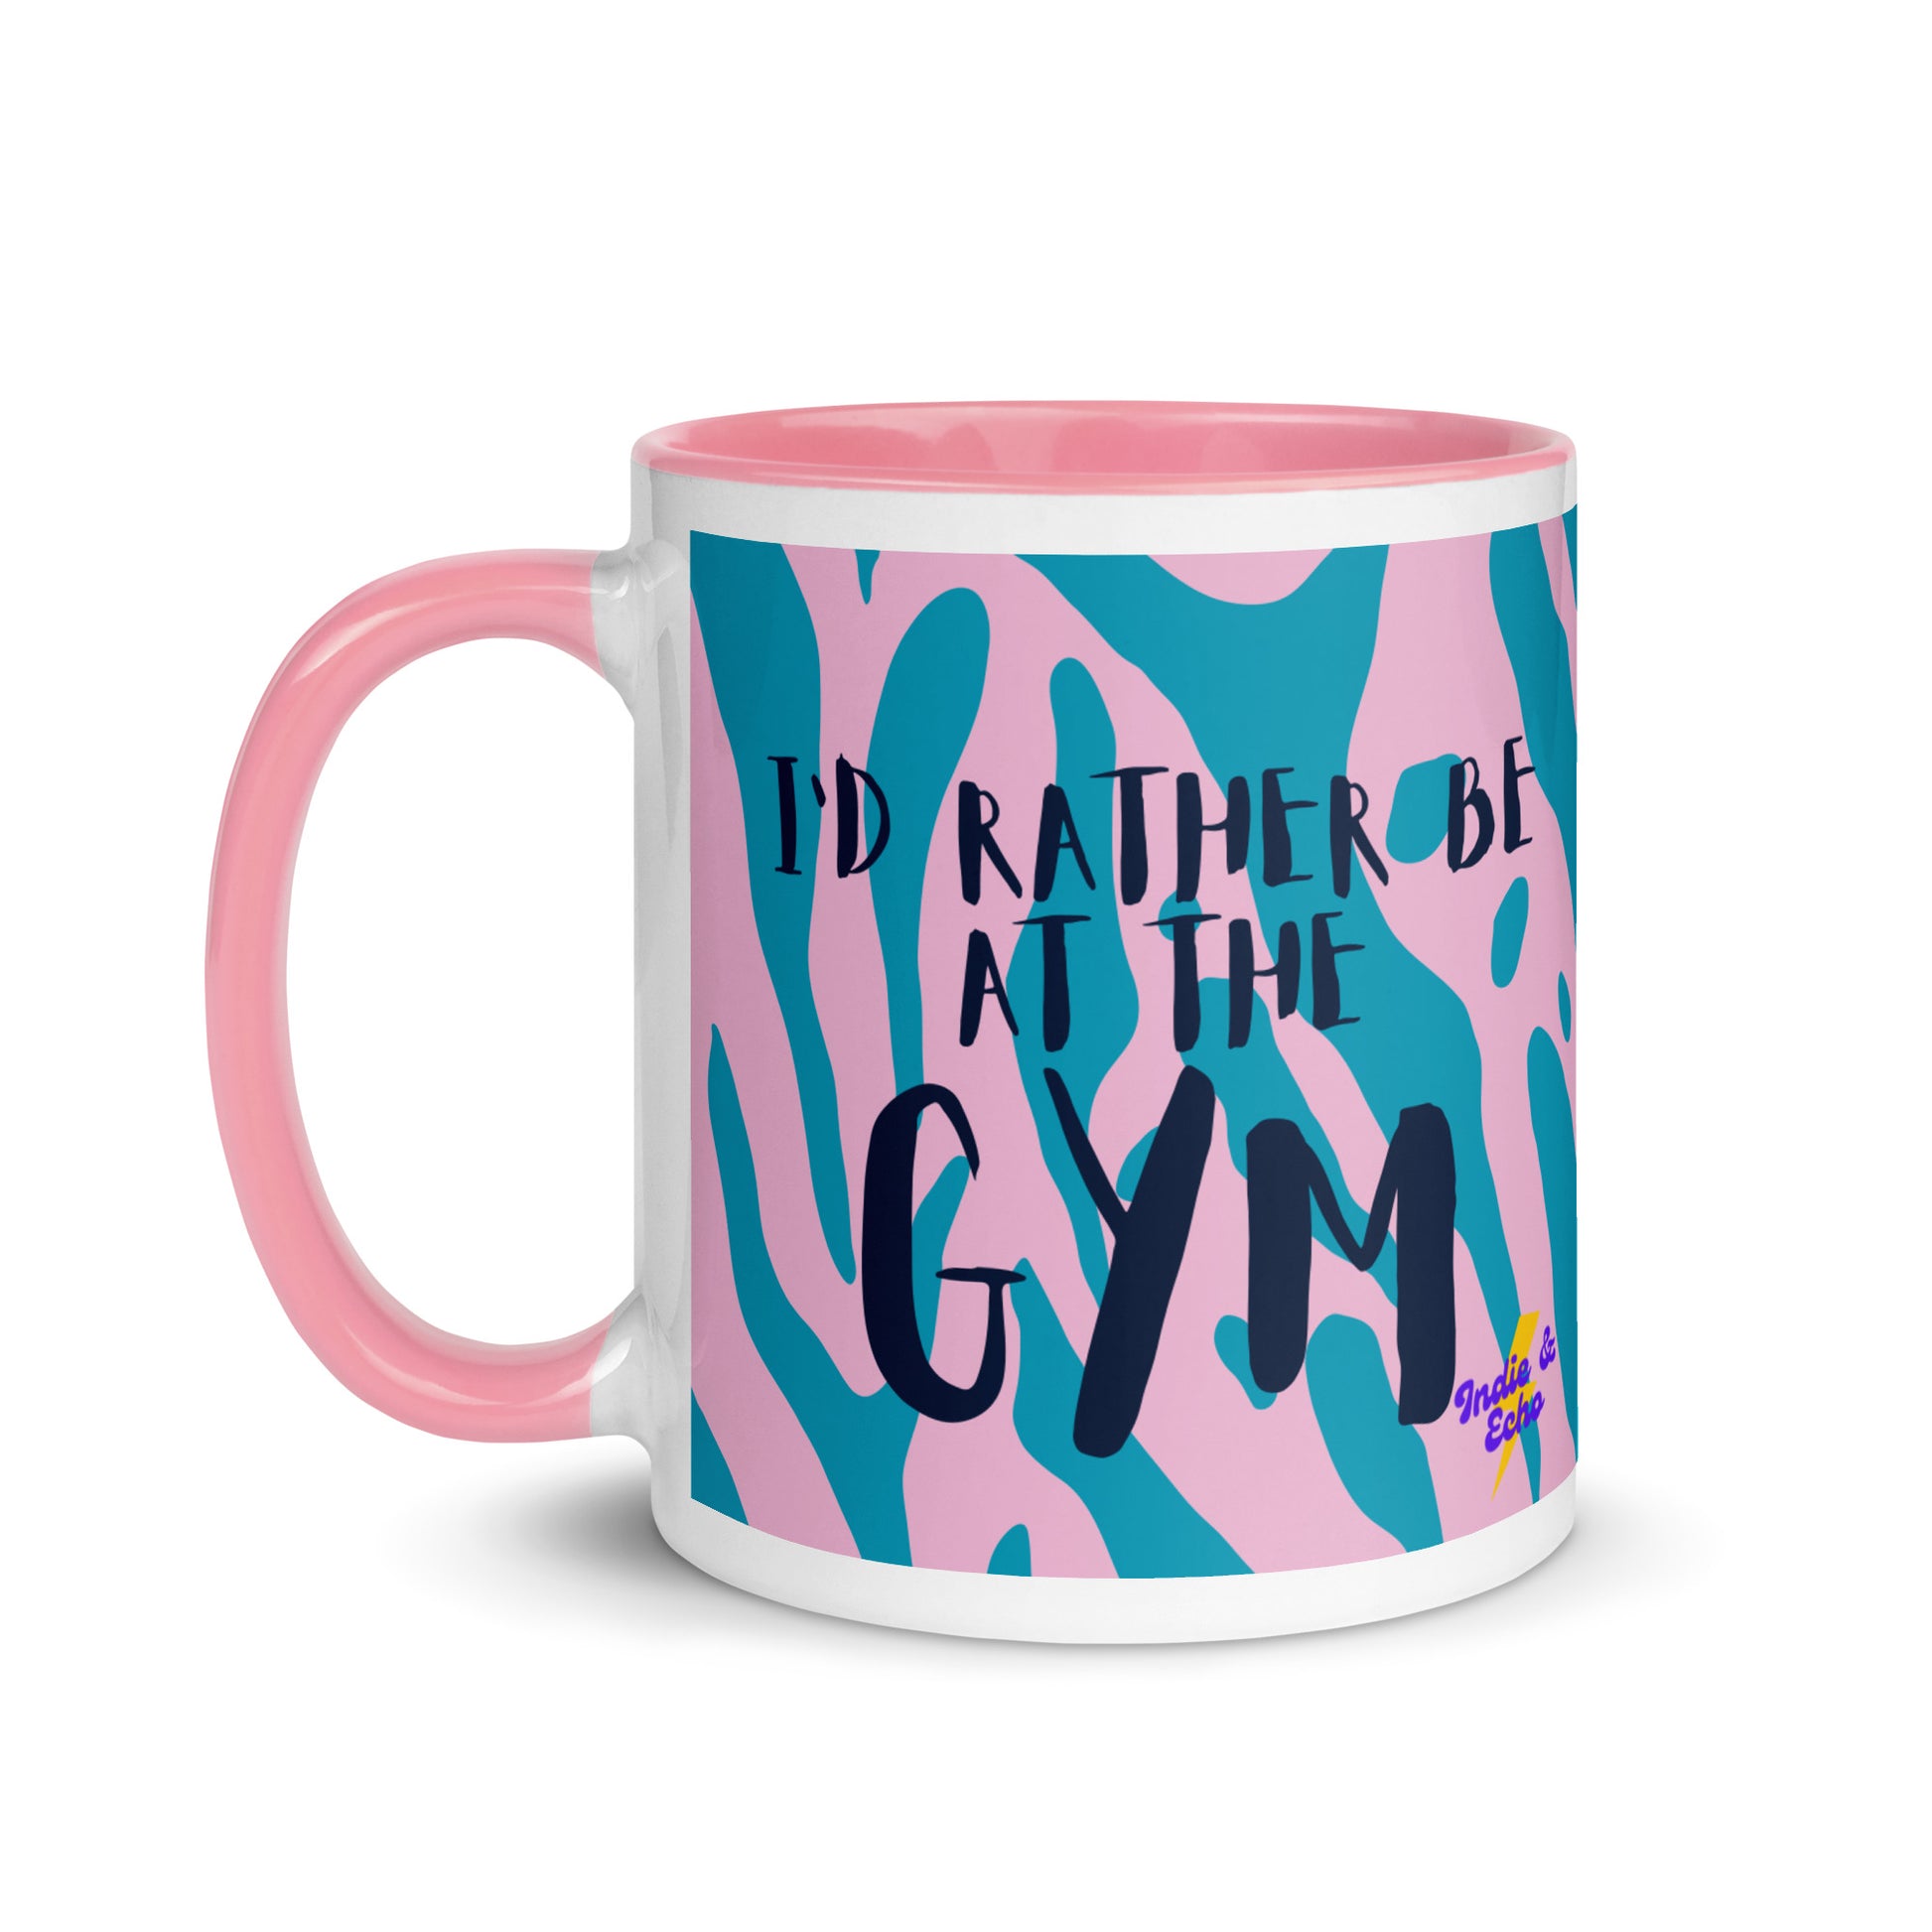 Pink handled mug with I'd rather be at the gym written on it, across a blue and pink animal print background. A gift for someone who loves the gym.